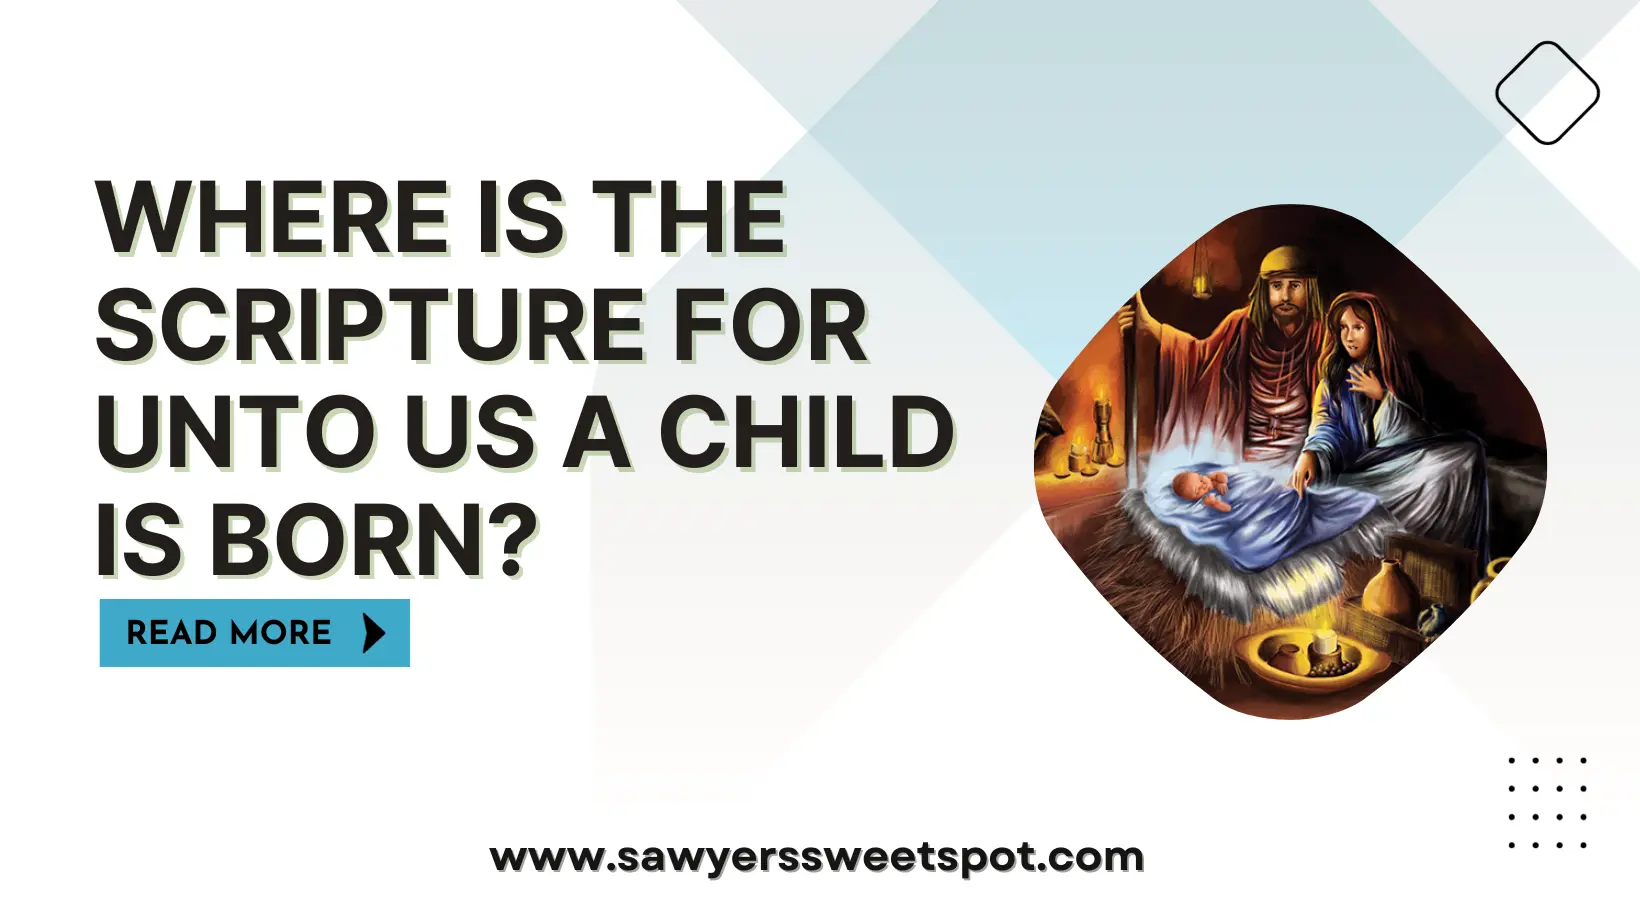 Where is the Scripture For Unto Us a Child is Born?